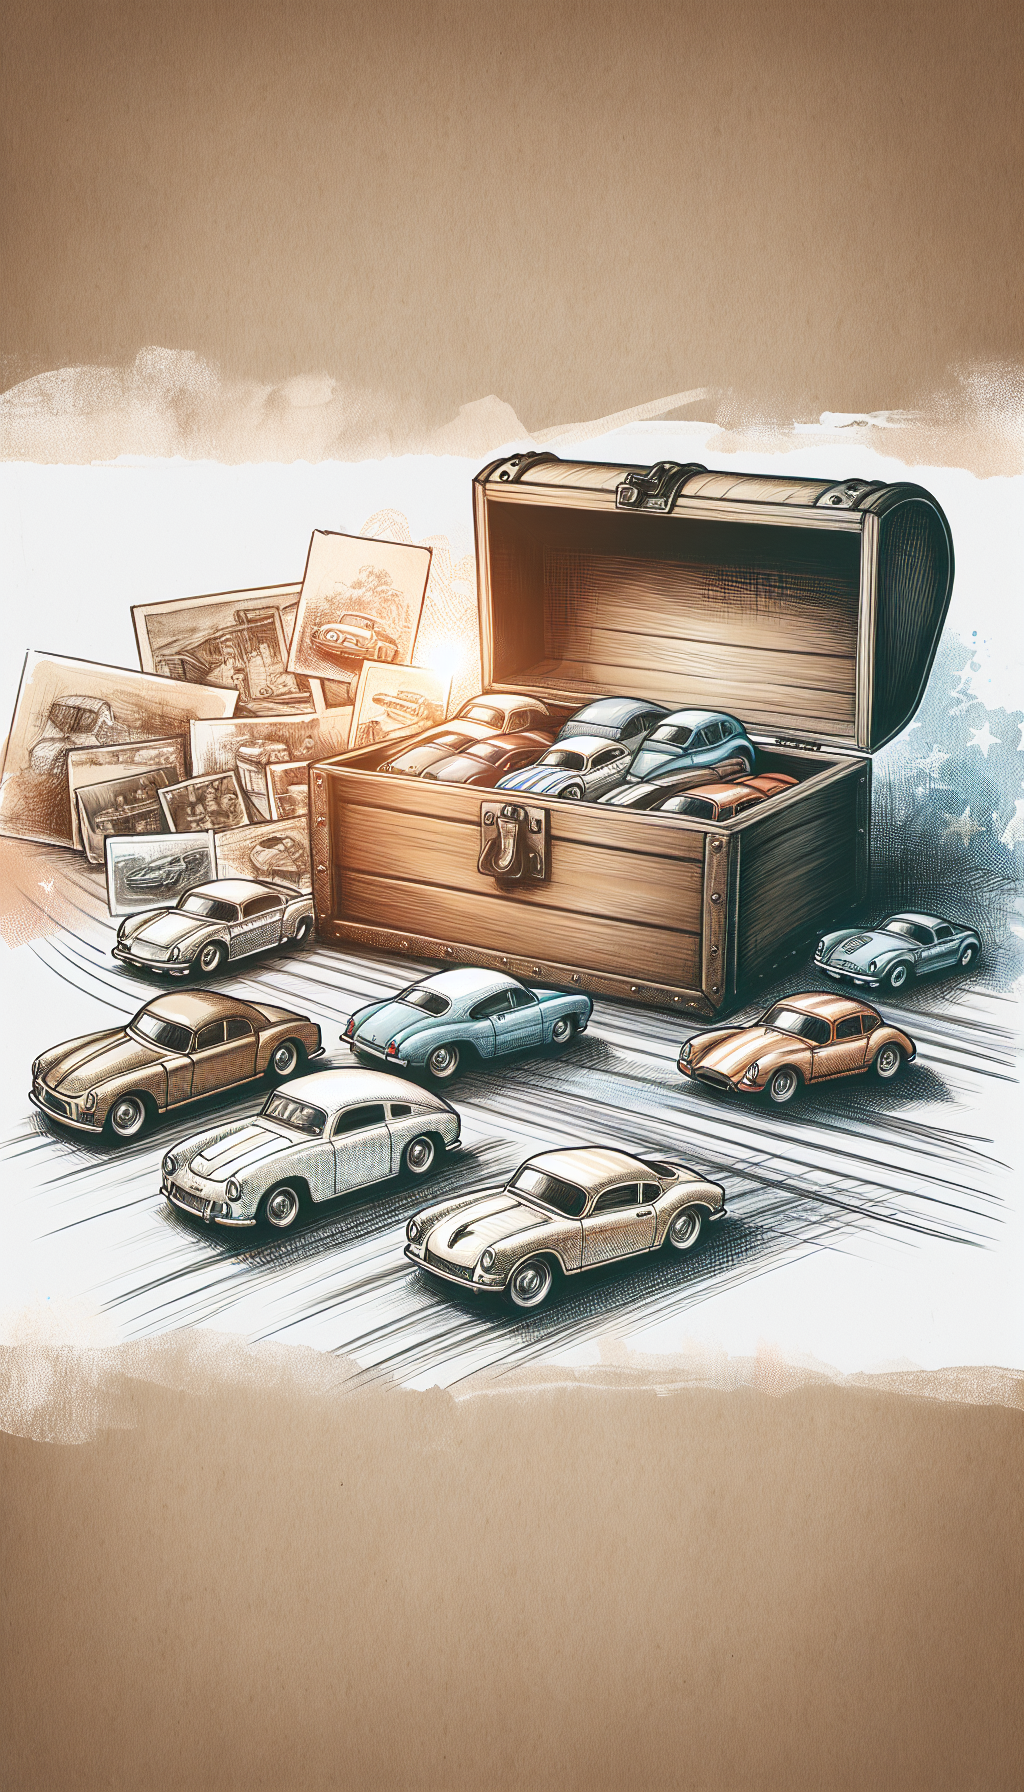 An illustration depicts a vintage wooden treasure chest, slightly ajar, casting a warm, nostalgic glow. Inside, a collection of pristine, classic matchbox cars is revealed, each positioned as if revving up on a track that weaves through old photographs and antiques, symbolizing their journey through time. The cars, highlighted in a sketch-like, cross-hatch style, contrast with the soft watercolor backdrop of memories.